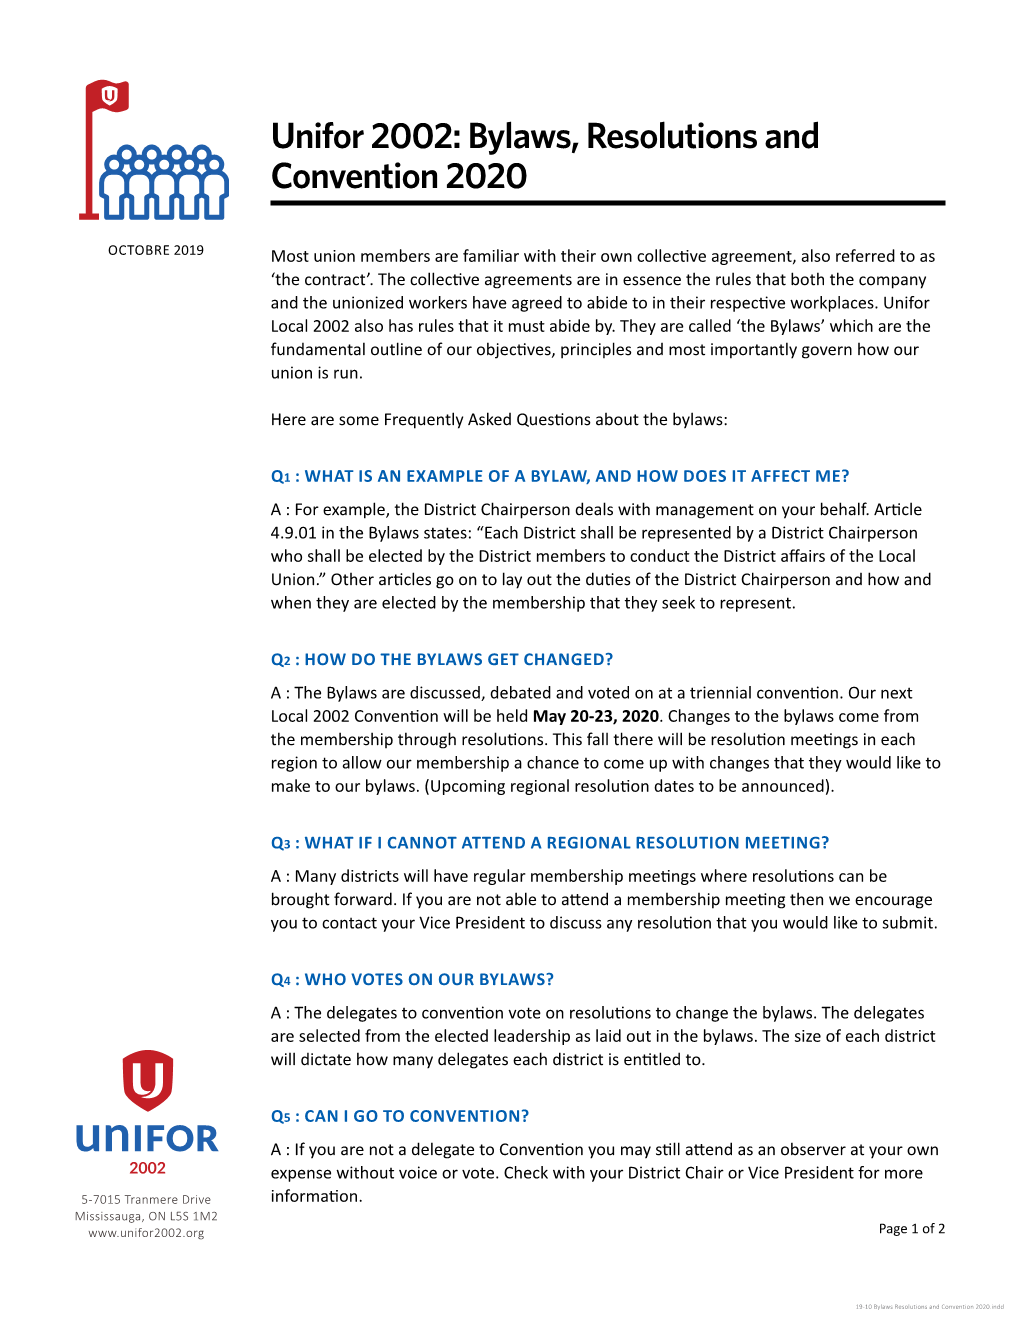 Bylaws, Resolutions and Convention 2020